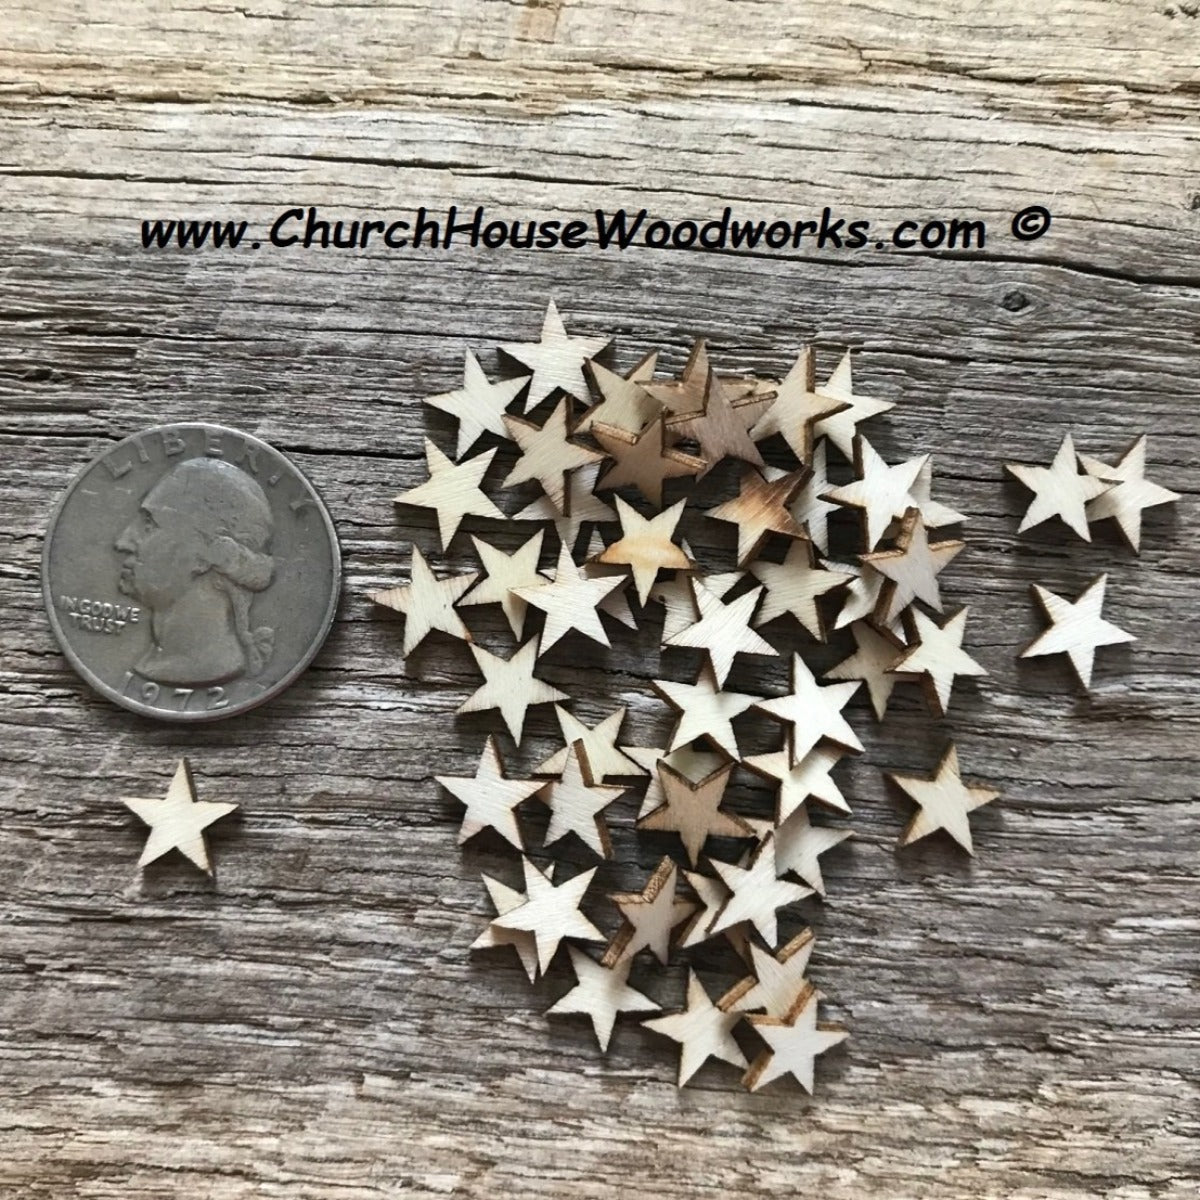 https://cdn.shopify.com/s/files/1/1147/8122/products/3-8_inch_wood_stars_for_wood_flags_wooden_flag_crafts_art_decor_embellisments_super_small_2_1800x1800.jpg?v=1627174572